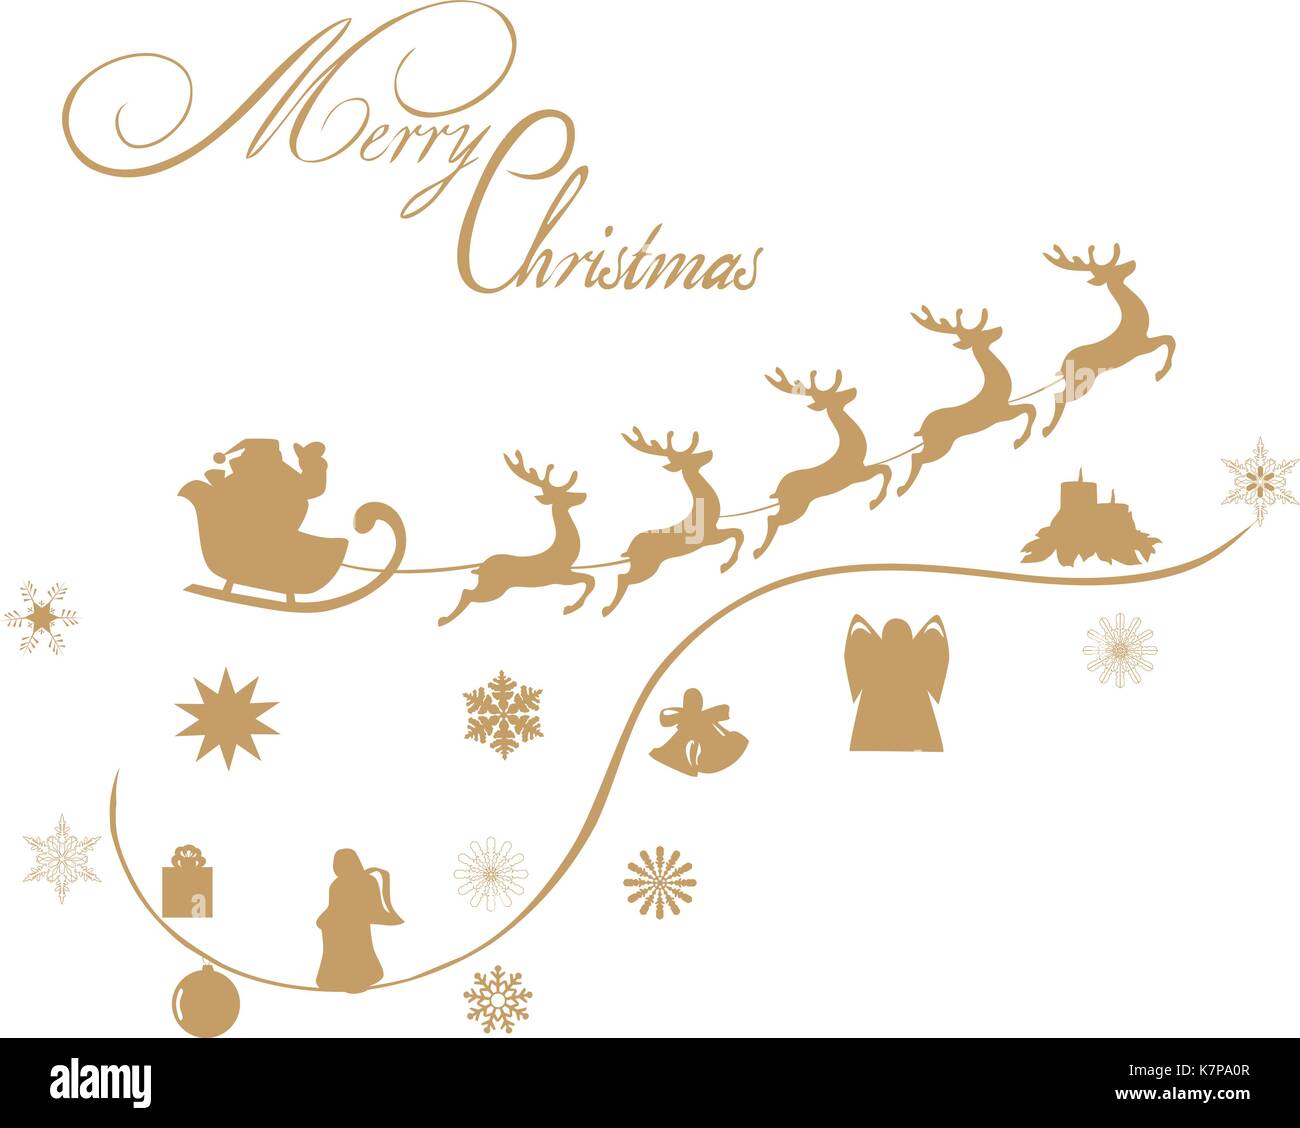 vector illustration of Christmas background with Santa Claus flying with reindeer. can be used for posters, cards, stickers. Stock Vector